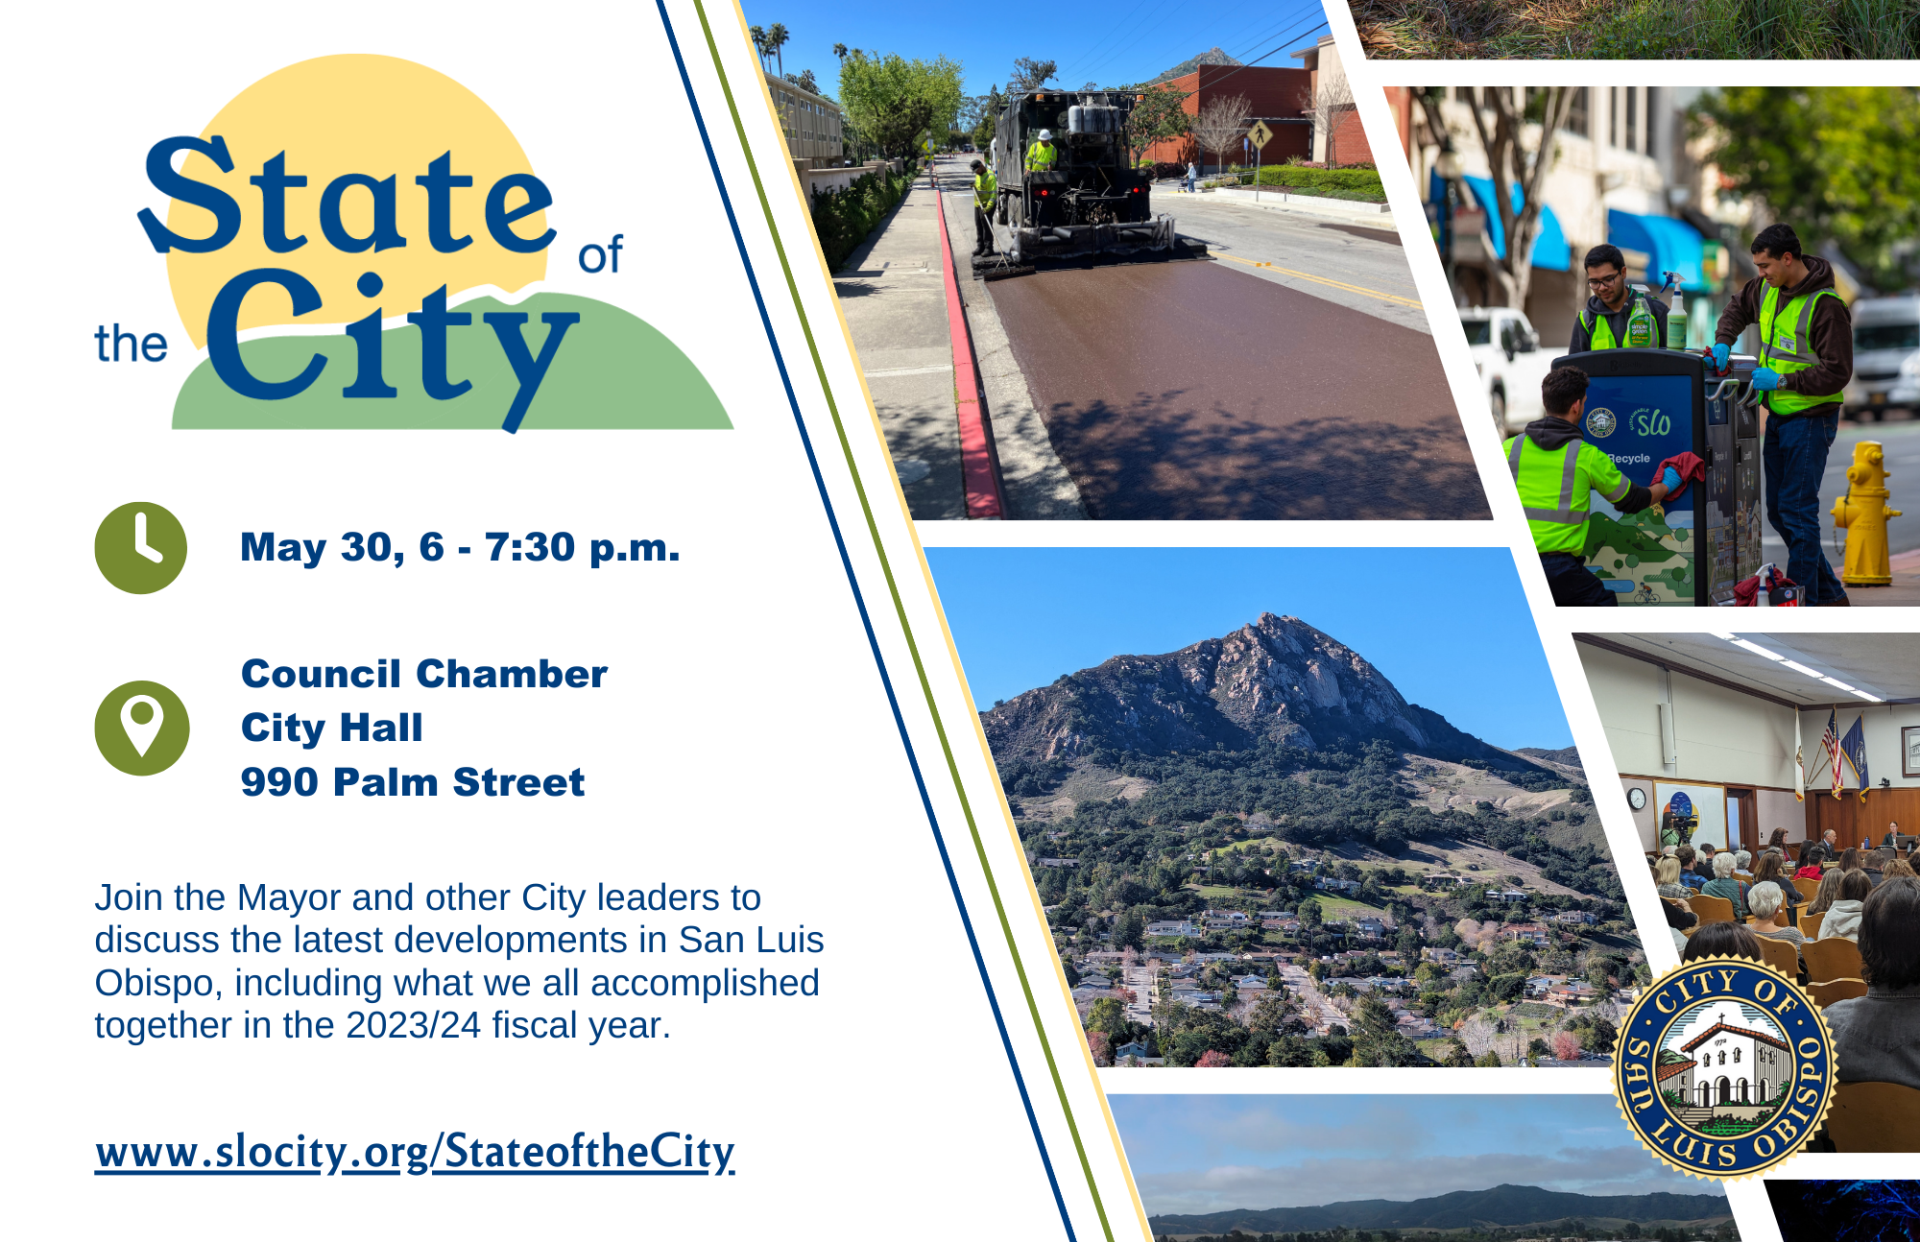 a photo collage of different sites in San Luis Obispo, including Bishop Peak and the foothill neighborhood, volunteers, road crews, and more. 